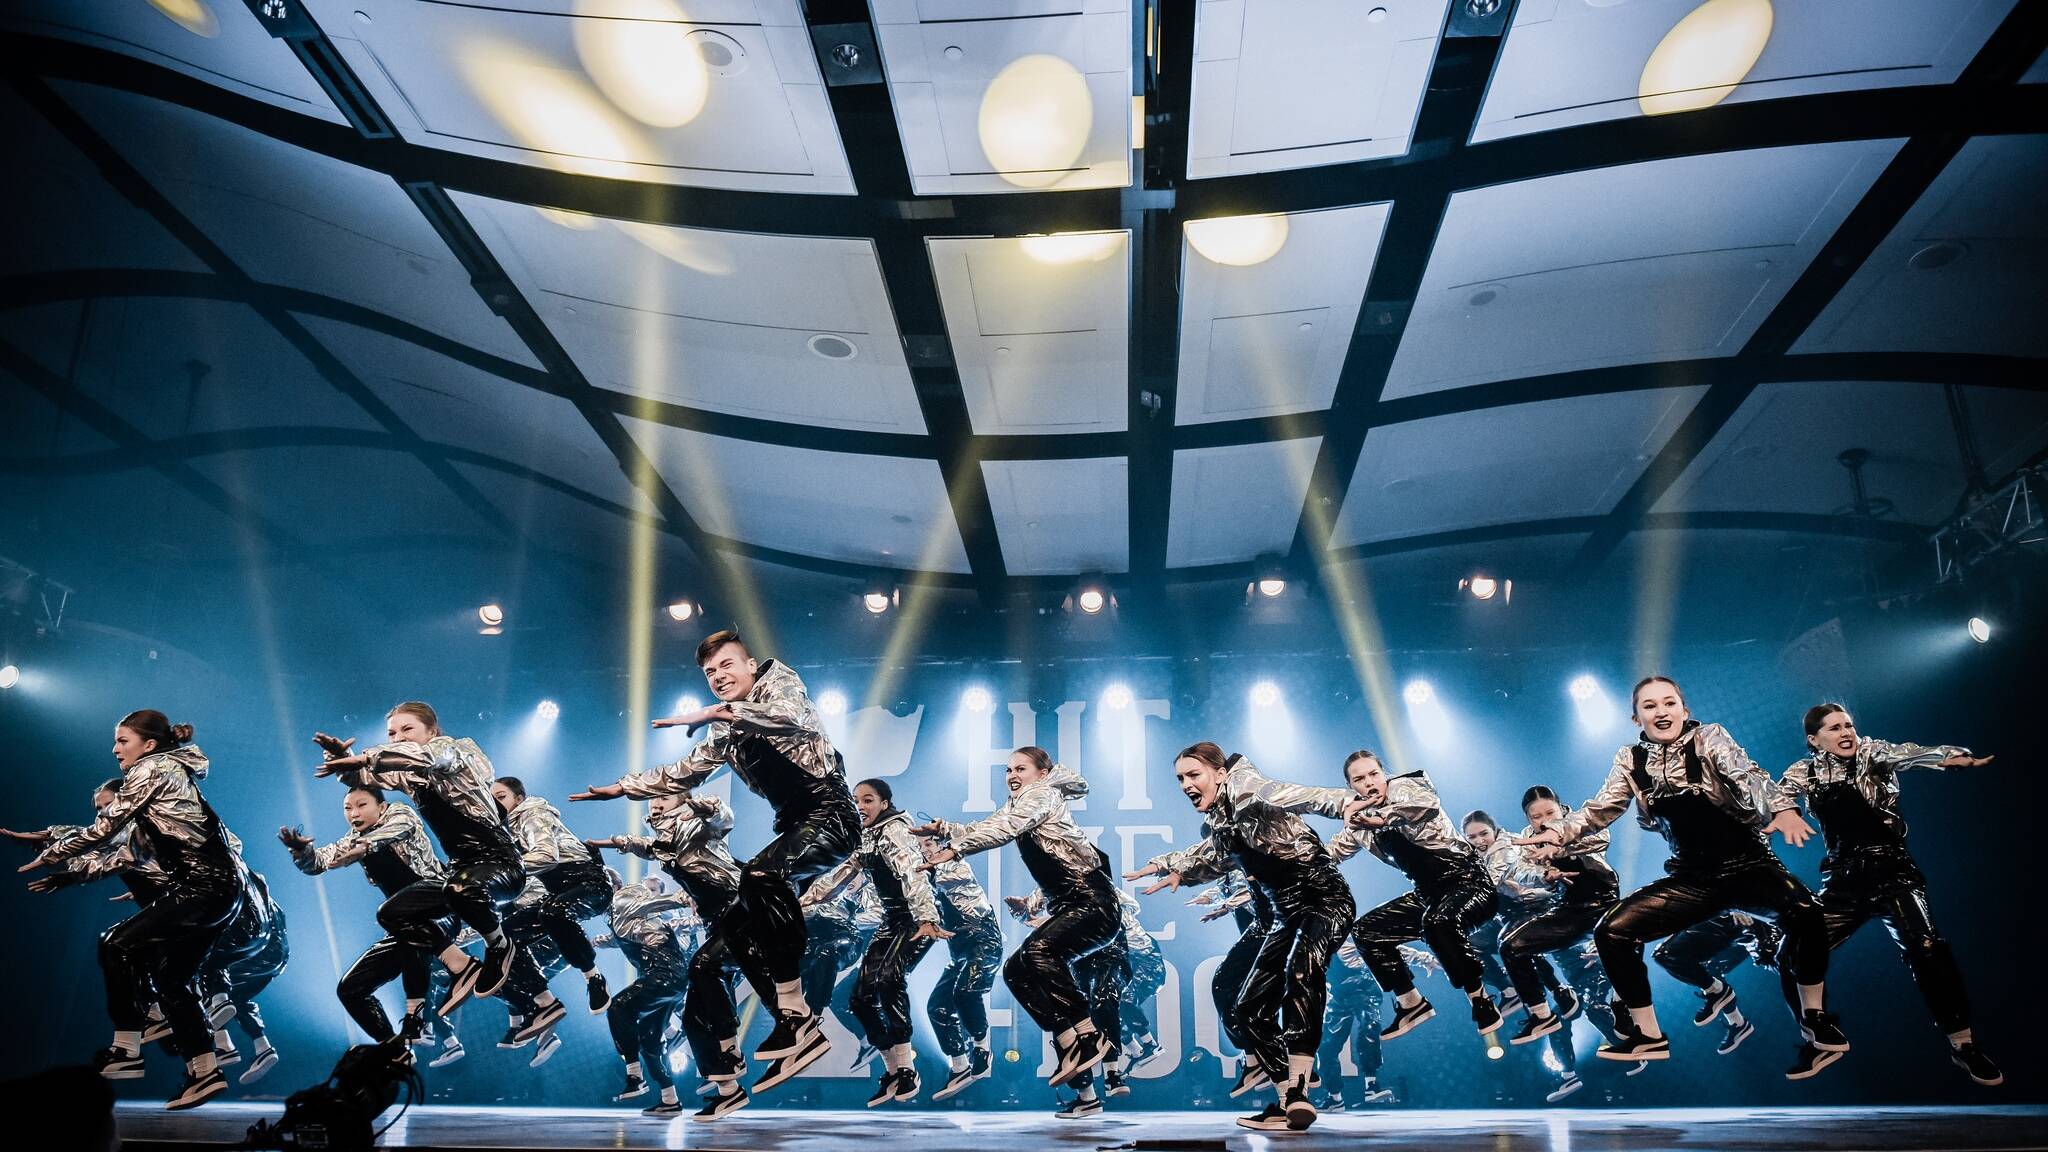 Dancers From Across Canada Hit The Floor For WorldClass MultiStyle